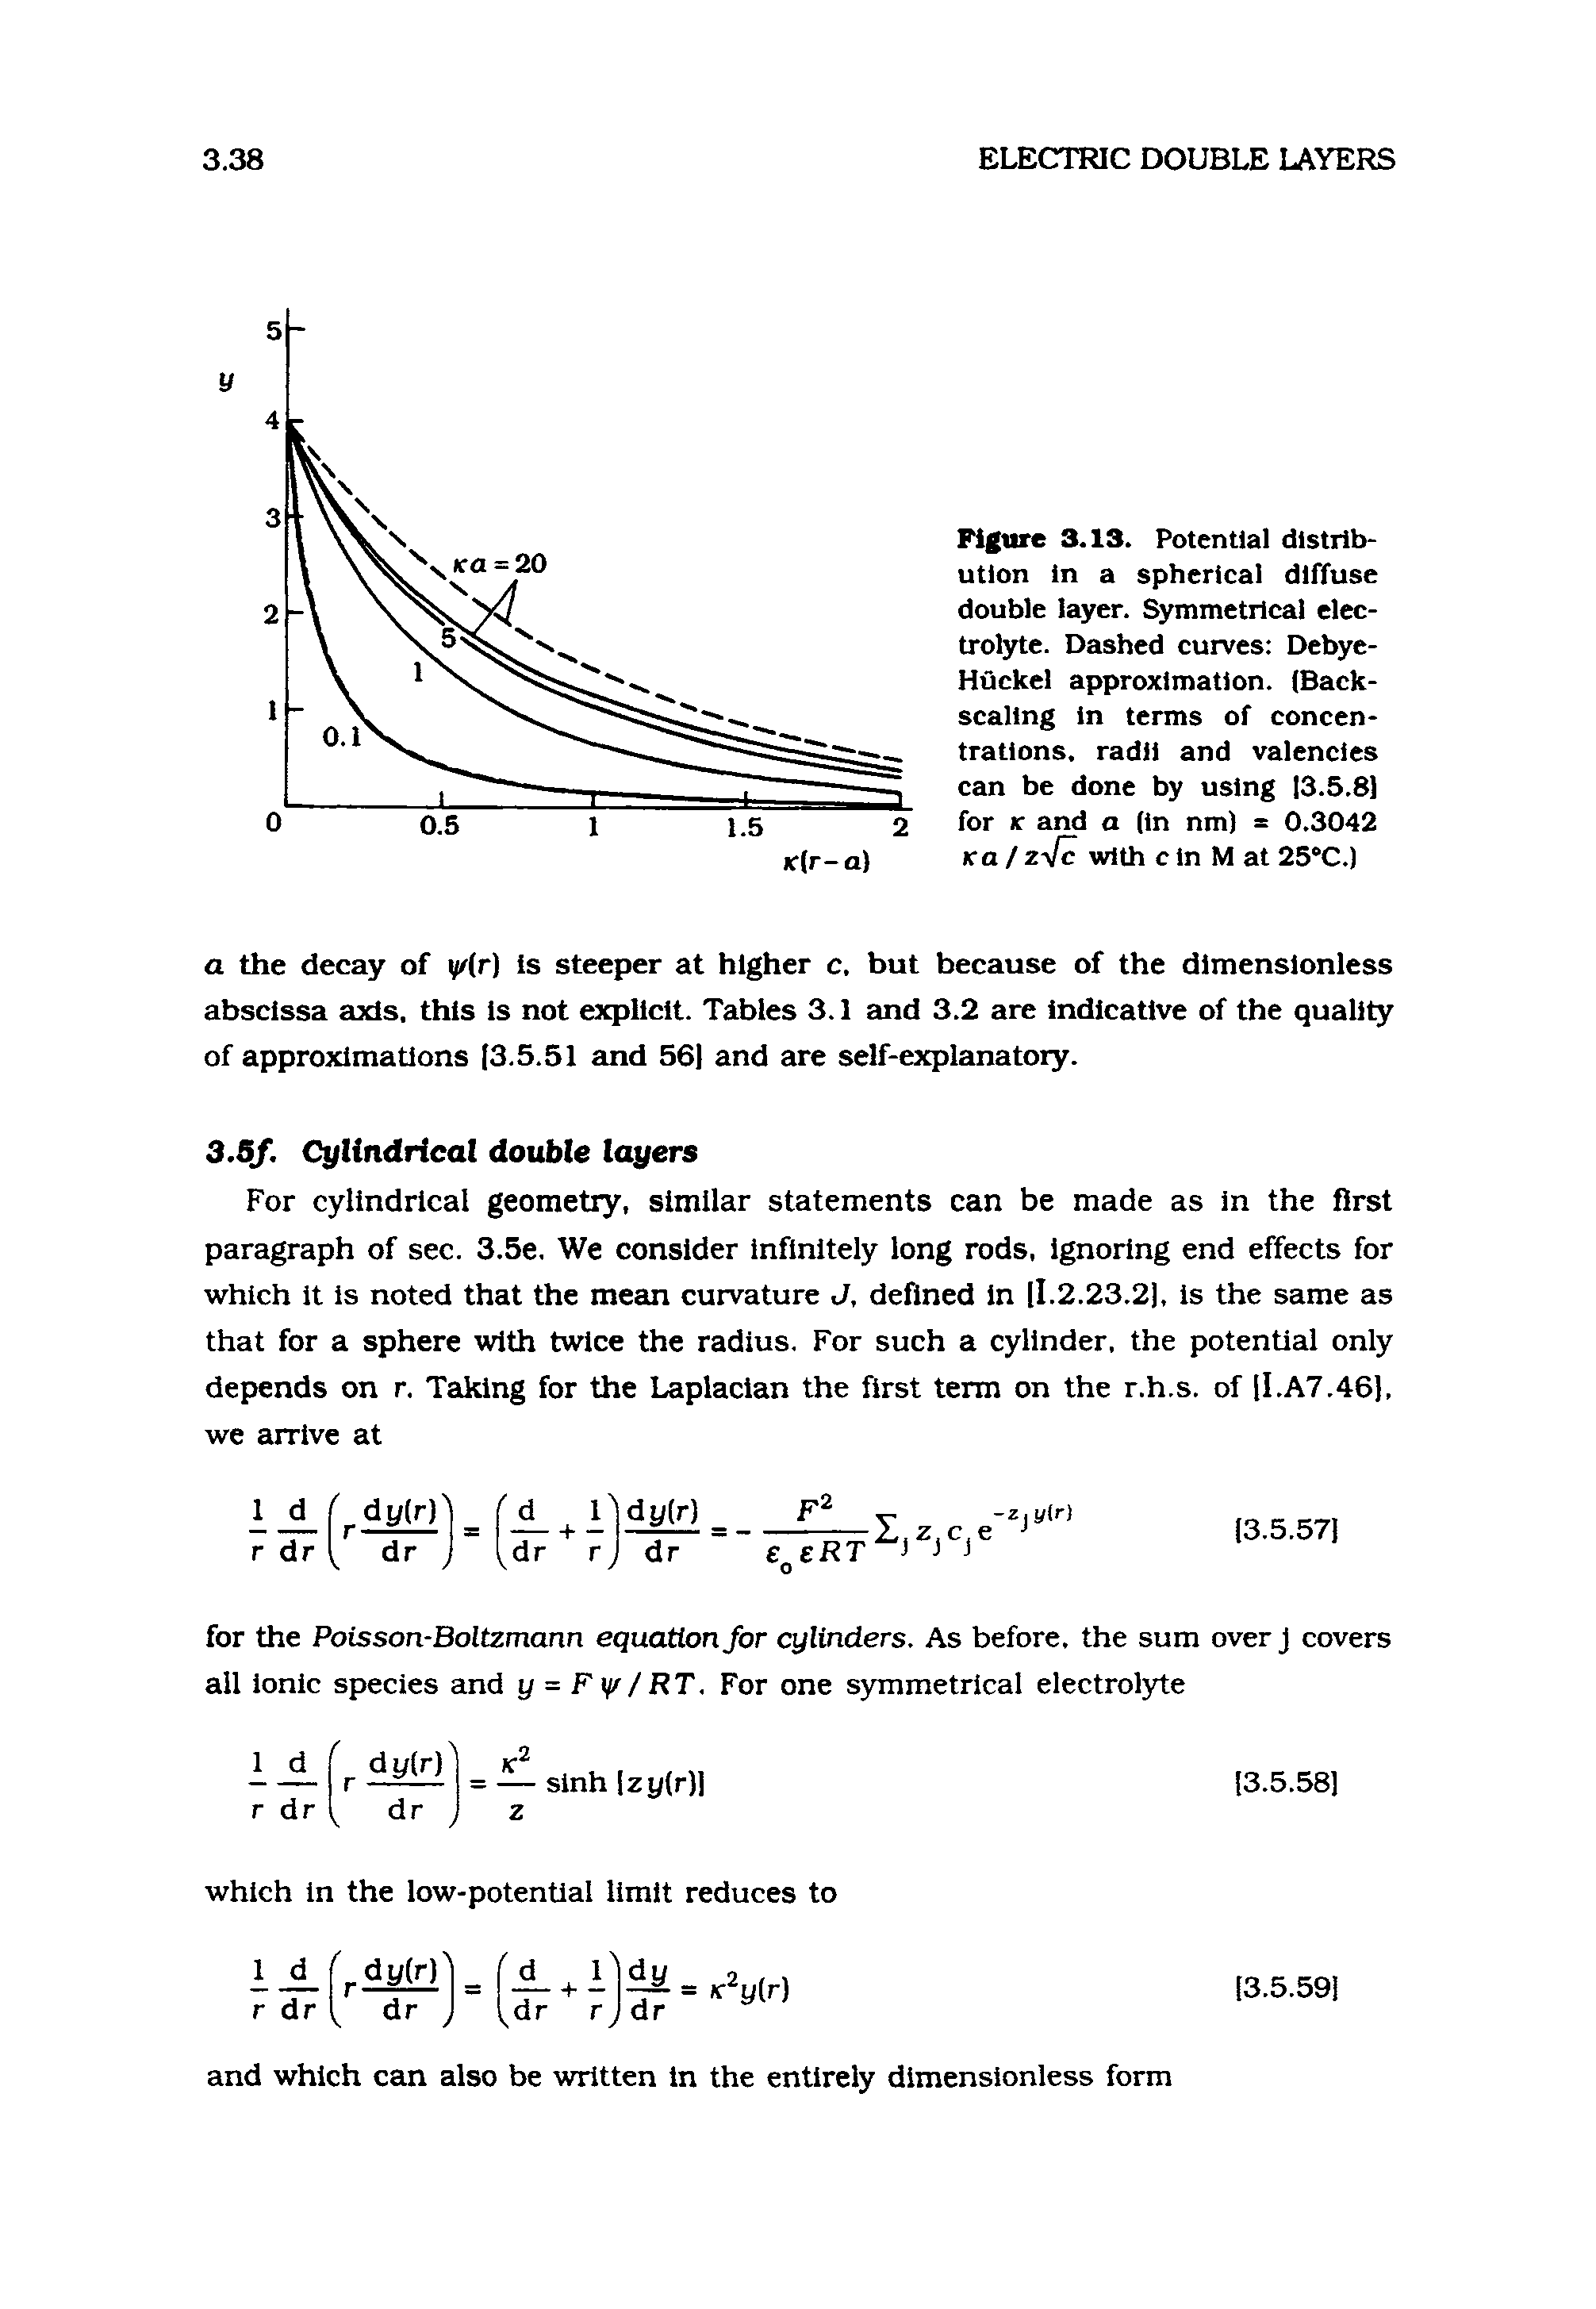 Figure 3.13. Potential distribution in a spherical diffuse double layer. Symmetrical electrolyte. Dashed curves Debye-Huckel approximation. (Back-scaling in terms of concentrations. radii and valencies can be done by using 13.5.8] for K and a (in nm) = 0.3042 Ka / z-Jc with c in M at 25 C.)...